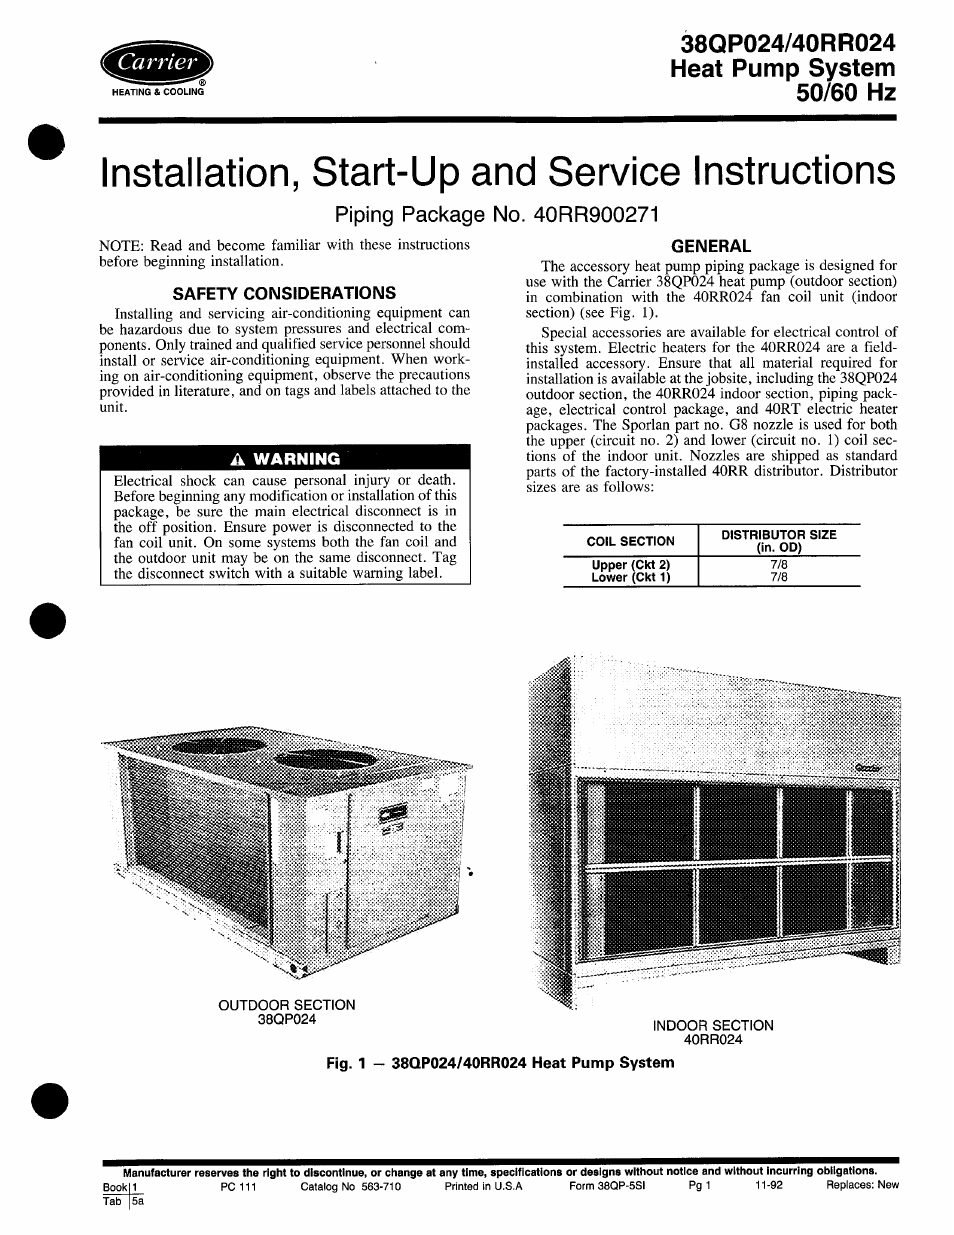 Carrier 40RR024 User Manual | 6 pages | Original mode | Also for: 38QP024